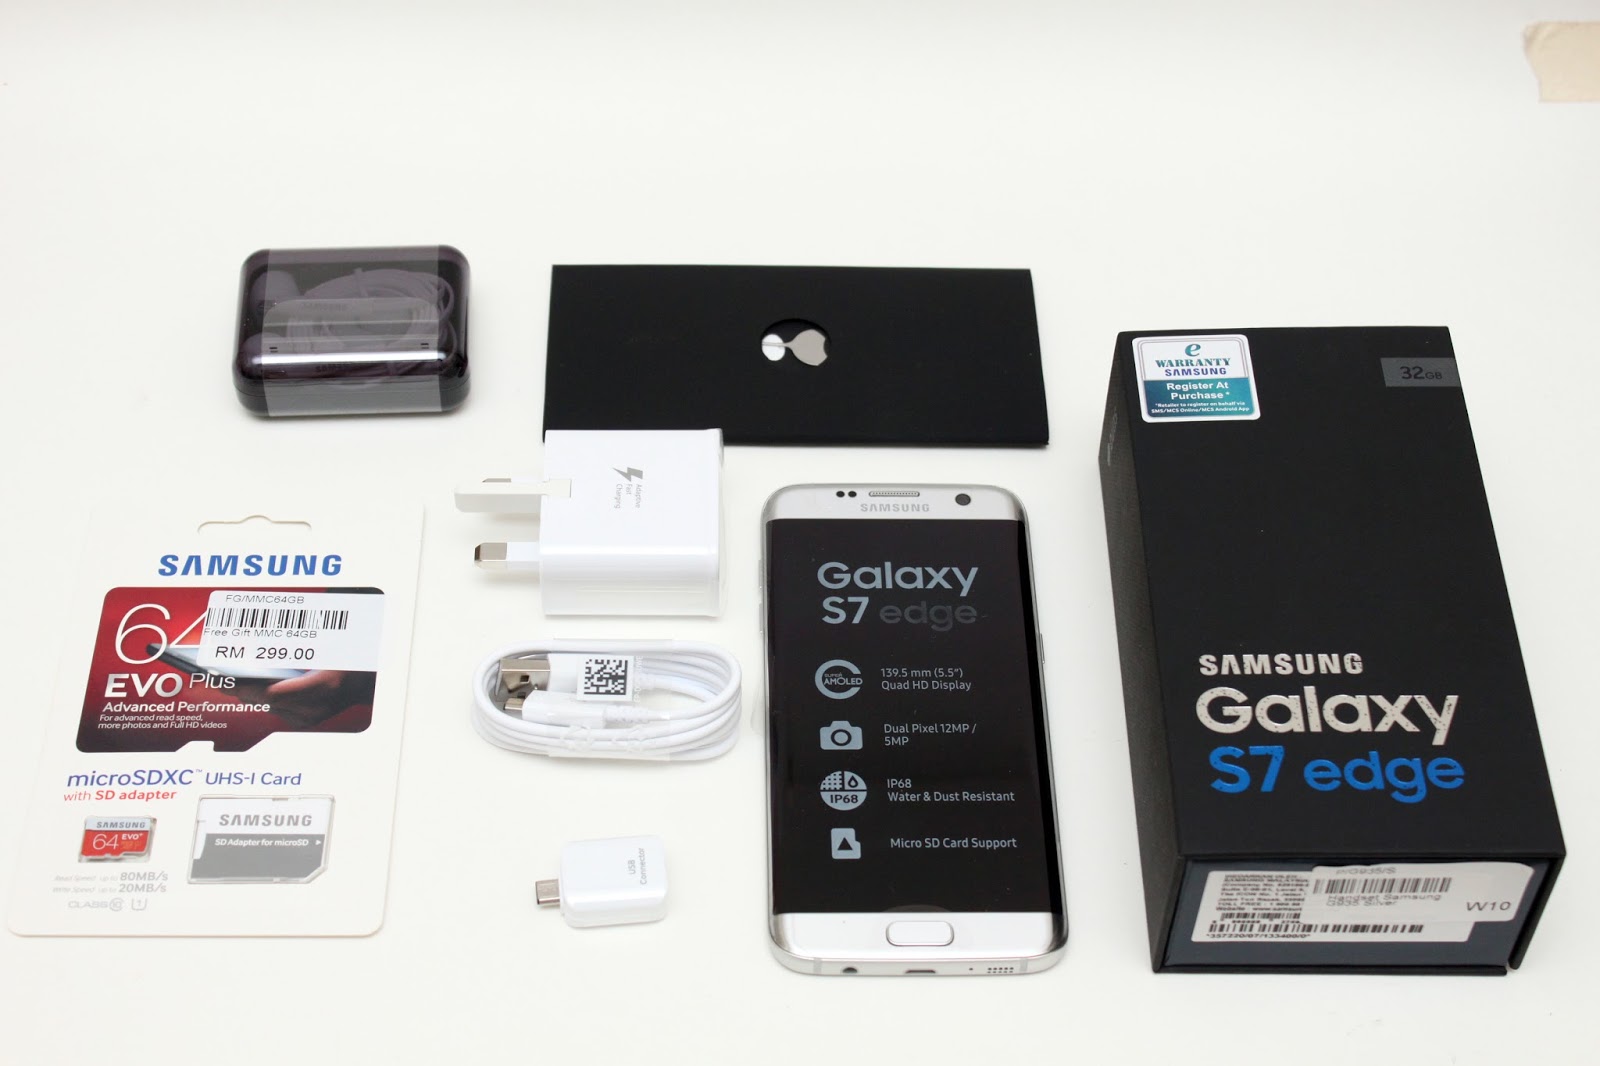 Where can you find free Galaxy phones?